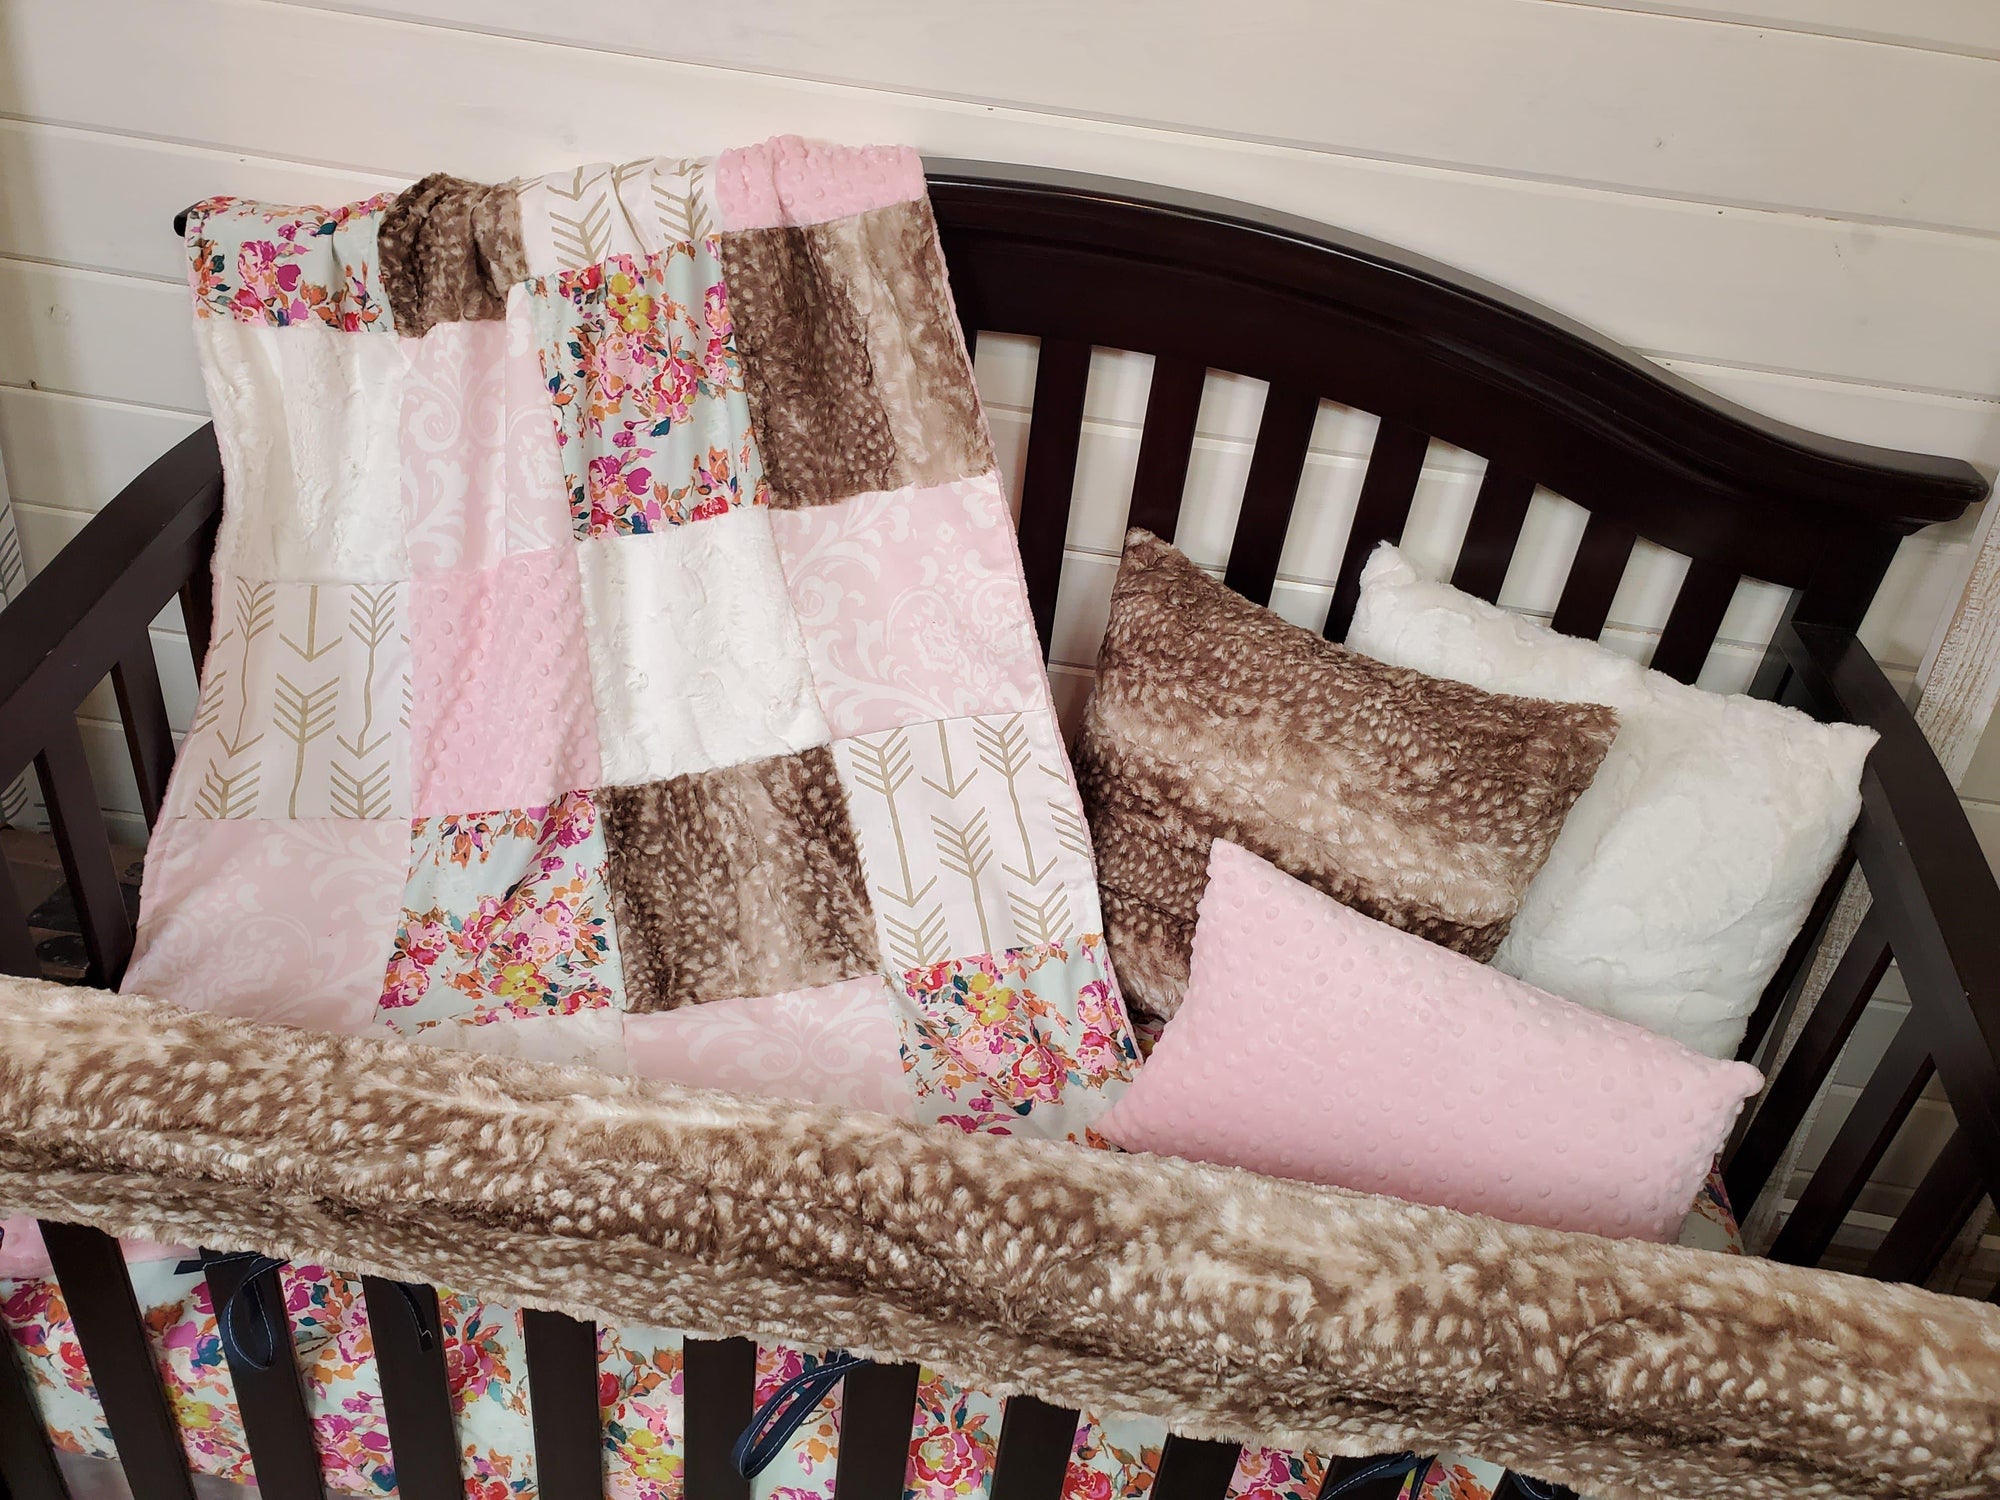 Girl Crib Bedding- Summer Floral, Damask, and Fawn Woodland Collection - DBC Baby Bedding Co 